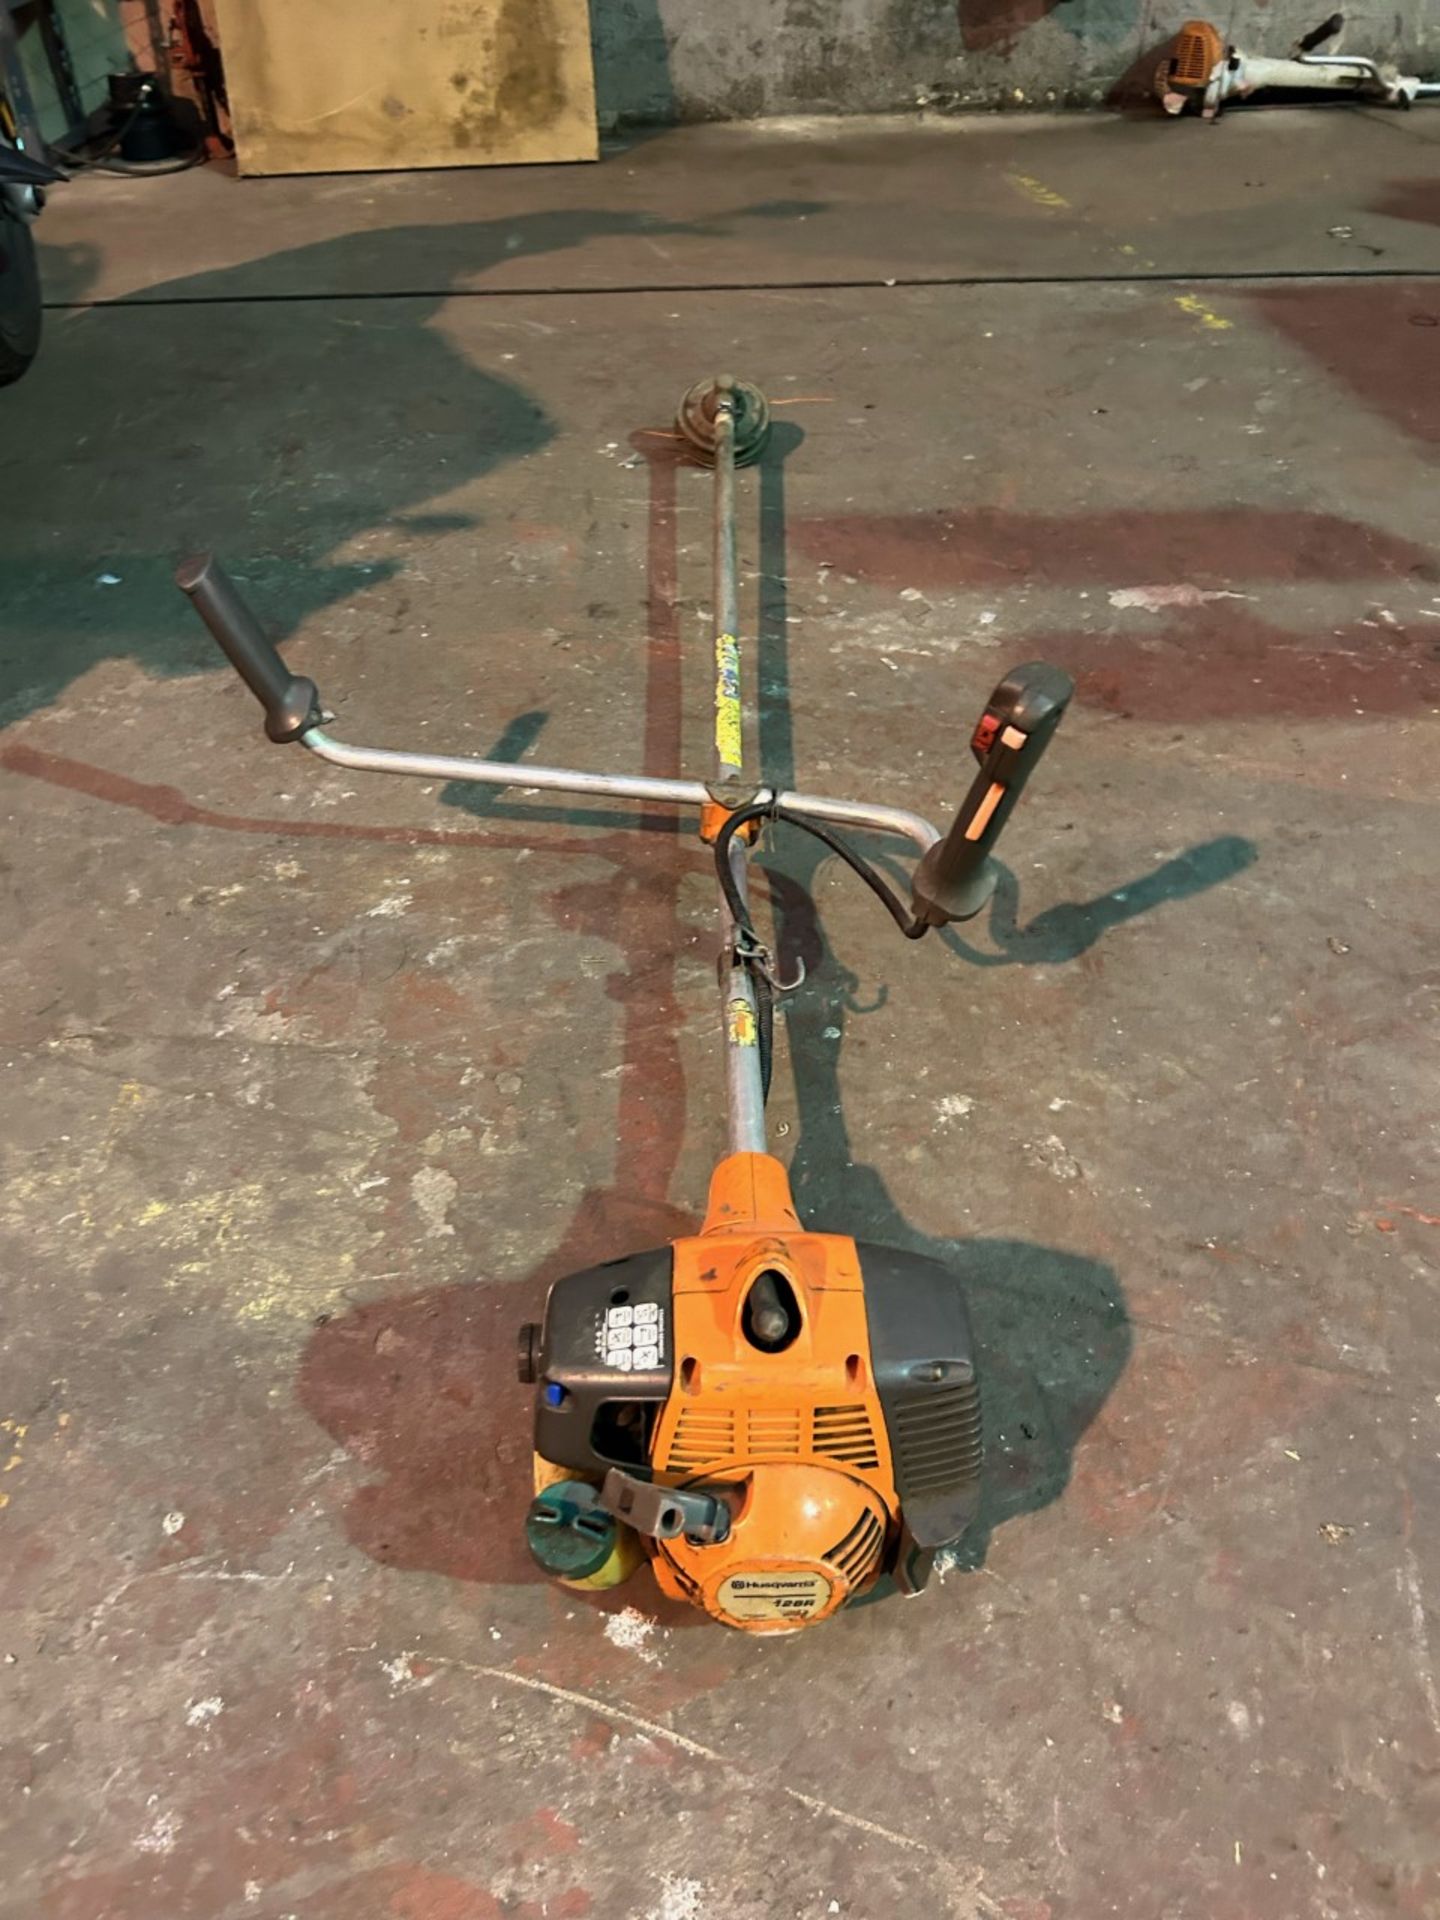 Husqvarna 128R brushcutter strimmer for spares or repair. Engine, shaft, cables and plastics all